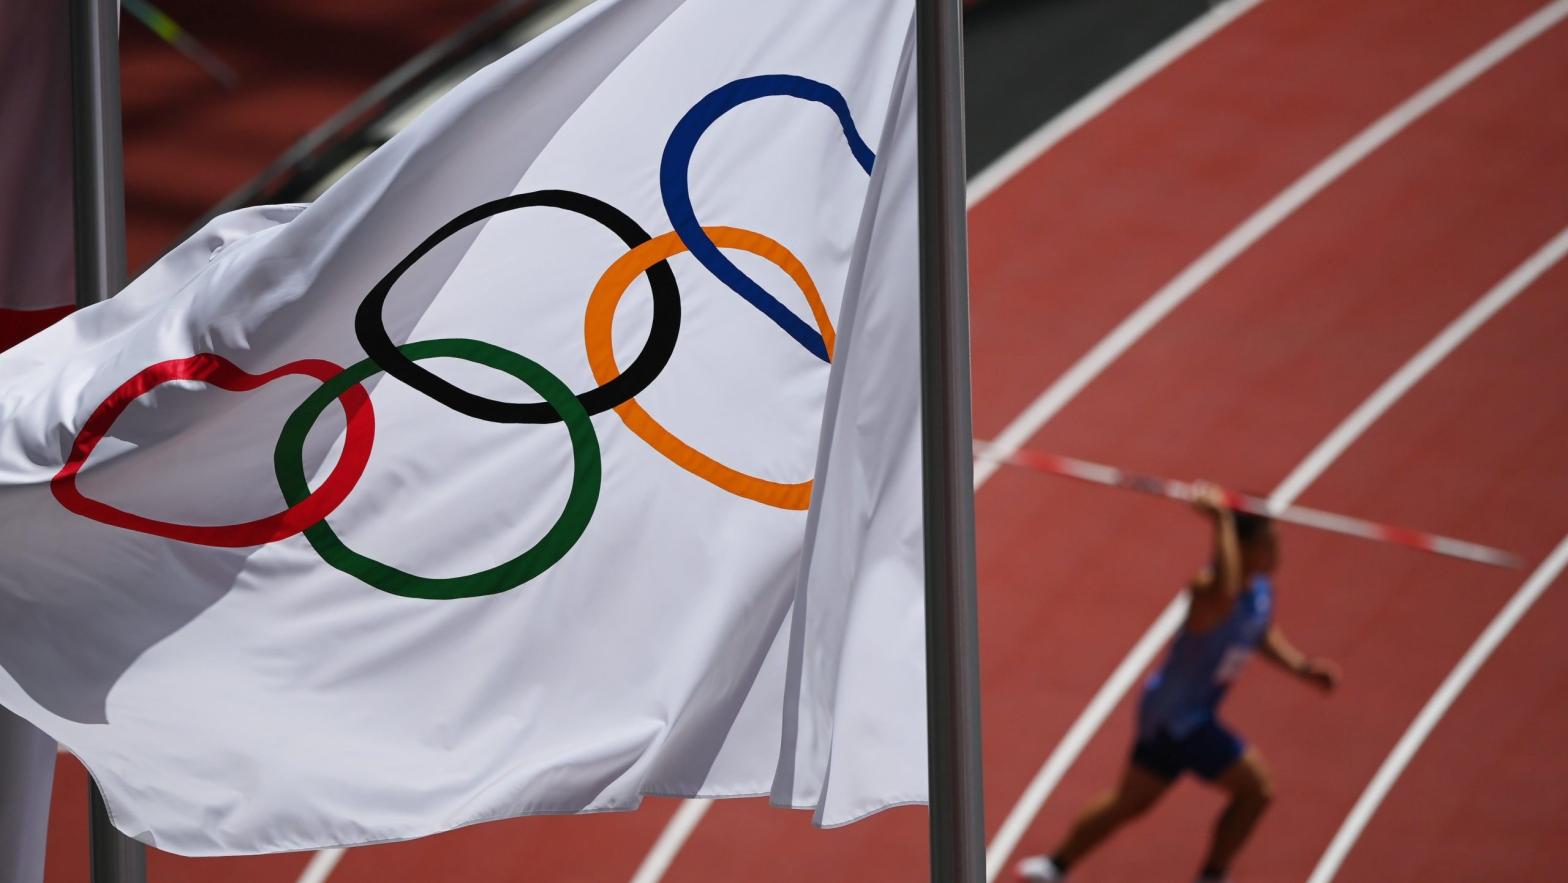 A view of the Olympic rings flag during the Men's Javelin Throw Qualification on day twelve of the Tokyo 2020 Olympic Games on August 04, 2021 (Photo: Matthias Hangs, Getty Images)